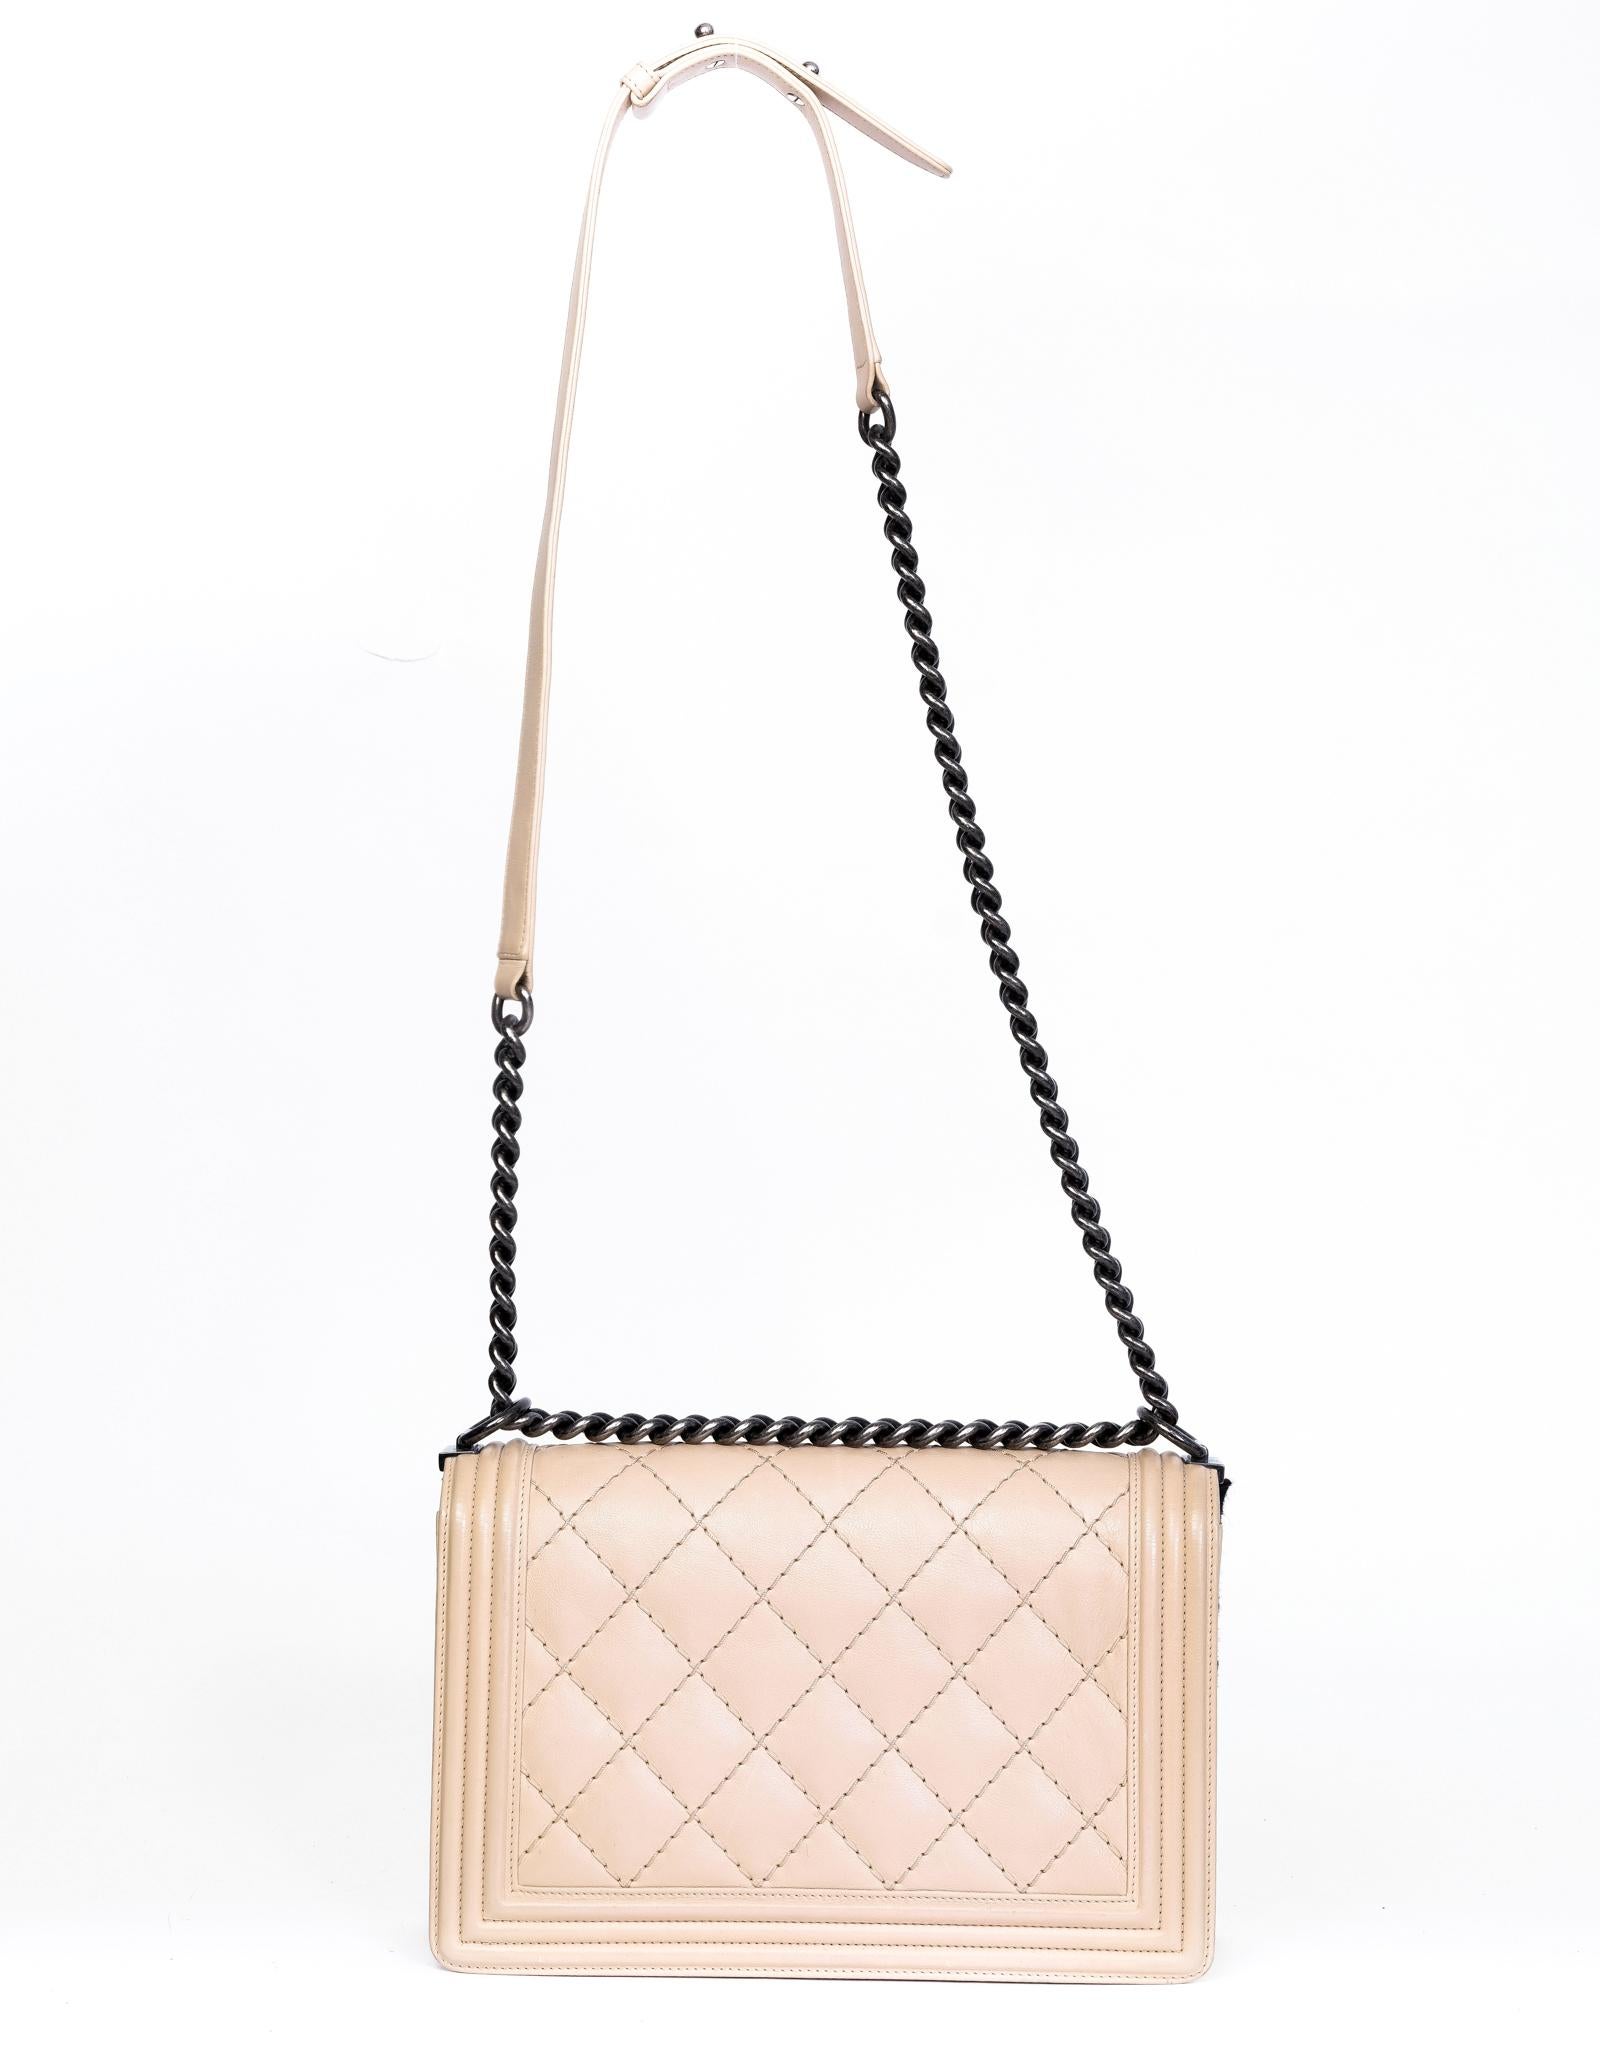 This Chanel Boy Bag in nude is constructed with sleek lines in a rectangular shape with diamond quilted leather exterior. Featuring gun metal toned hardware with an interlocking CC Chanel logo, a large link chain, a leather cross body strap, and